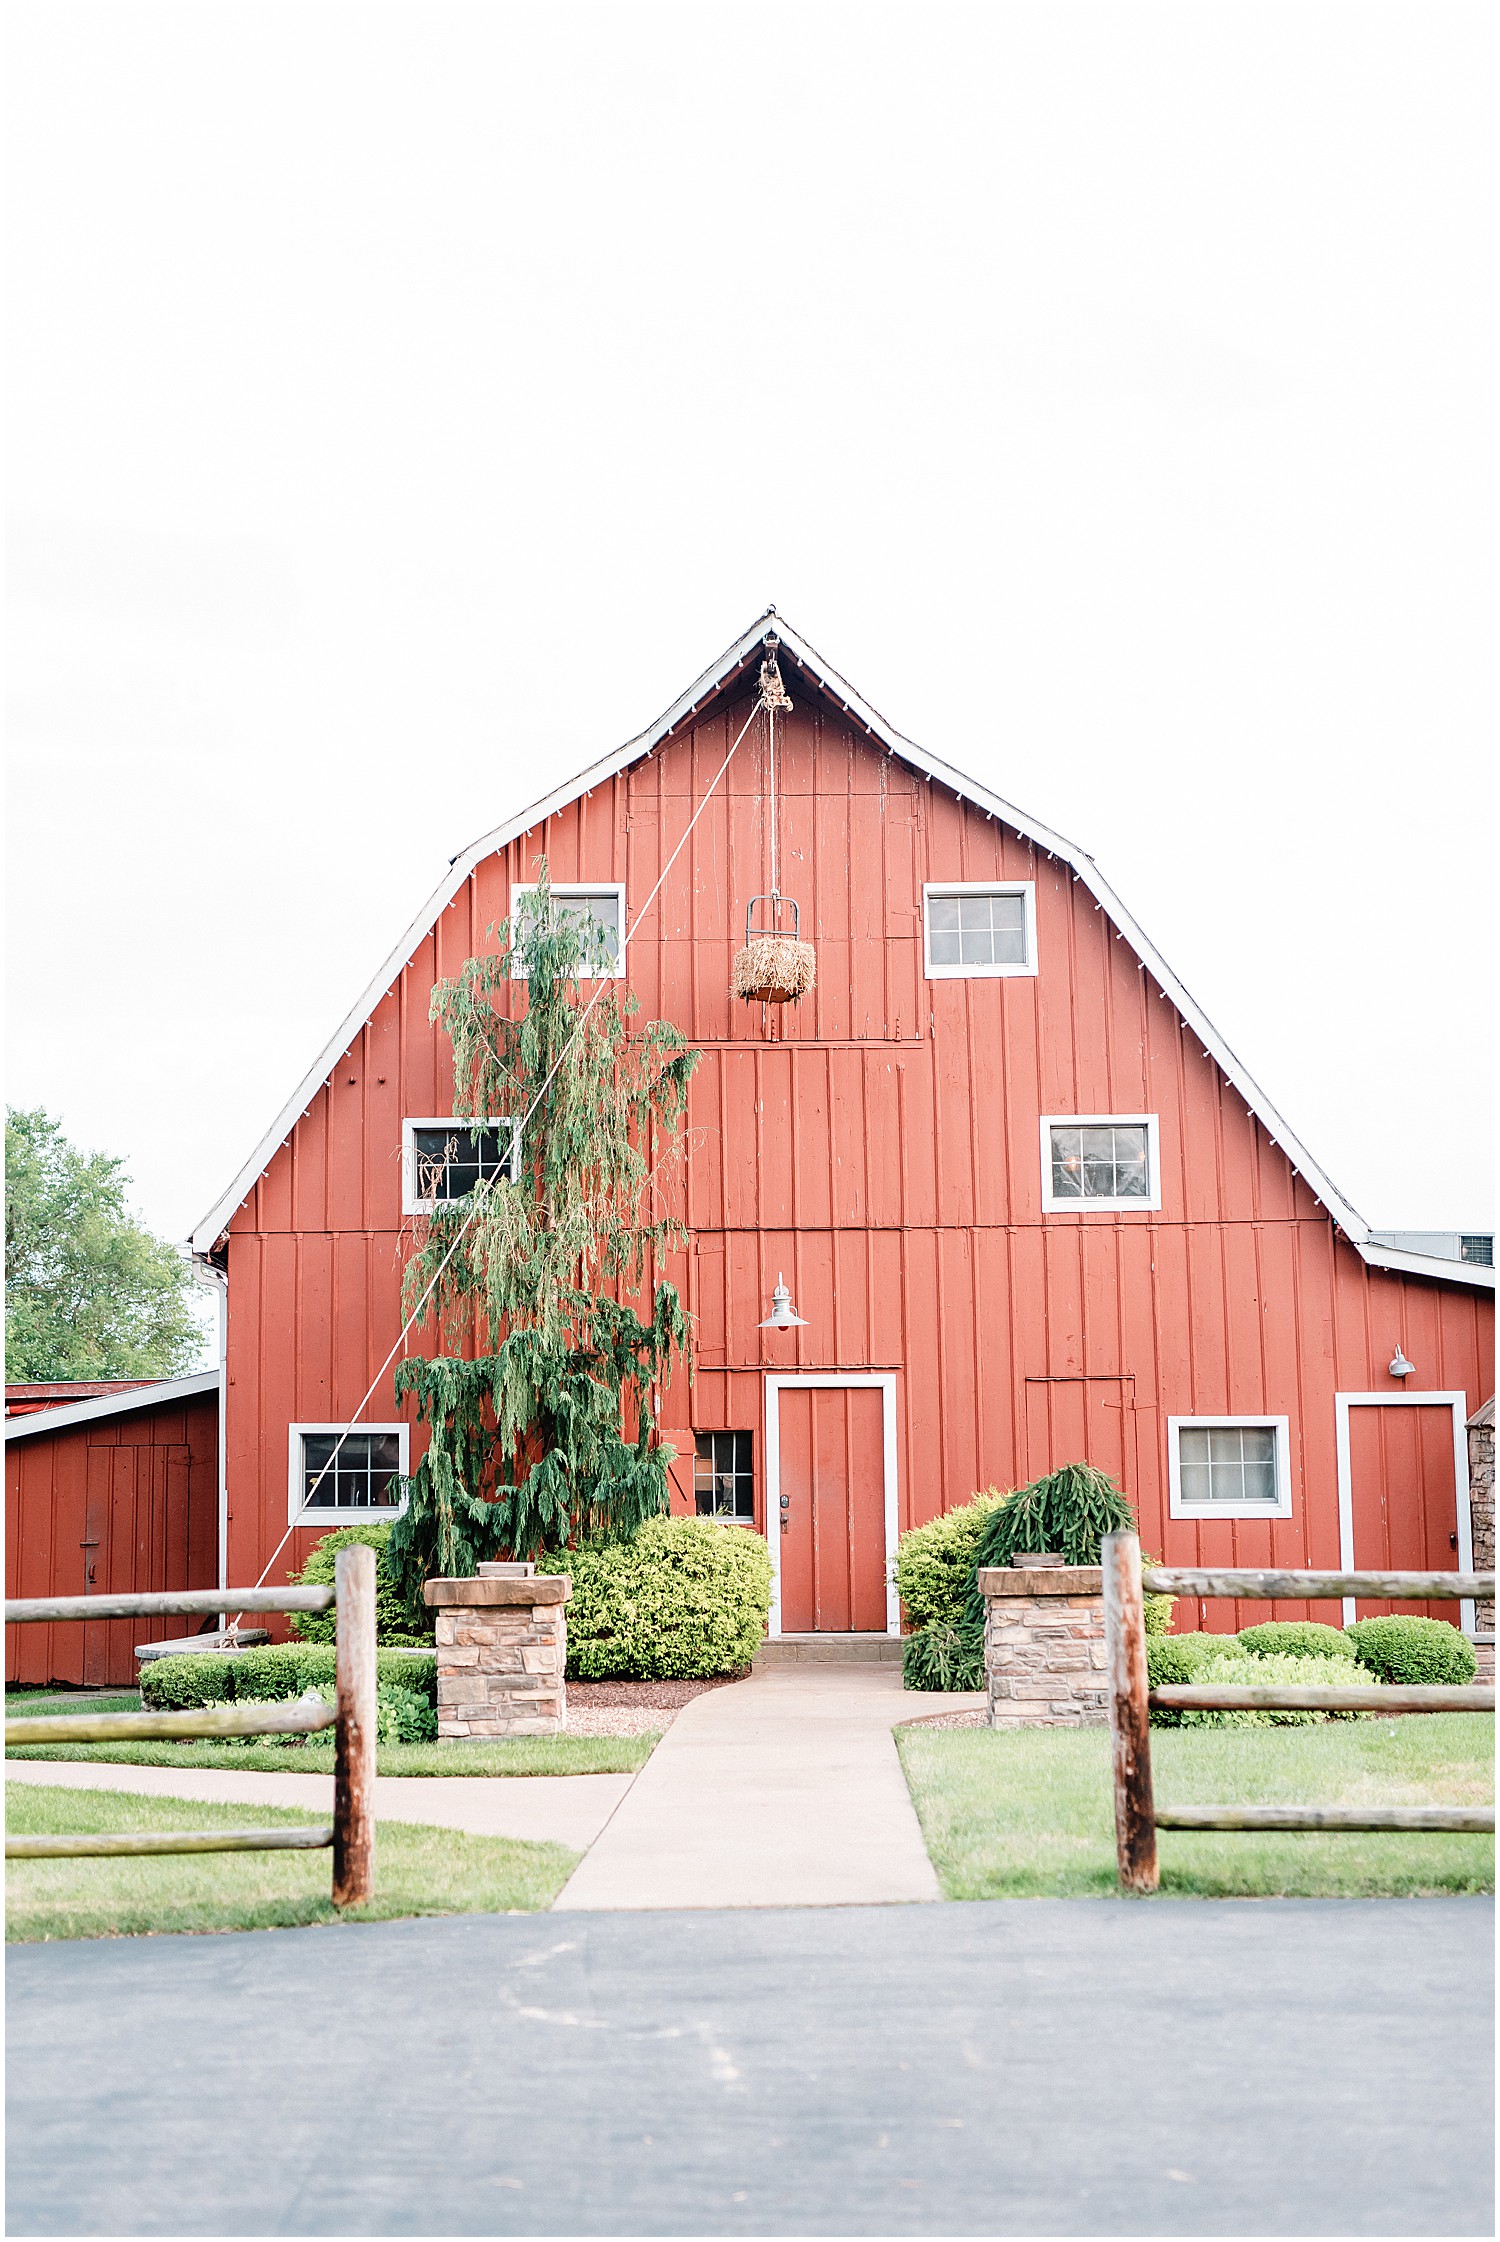 venue shot of the red barn at cedar lake cellars in wright city, mo